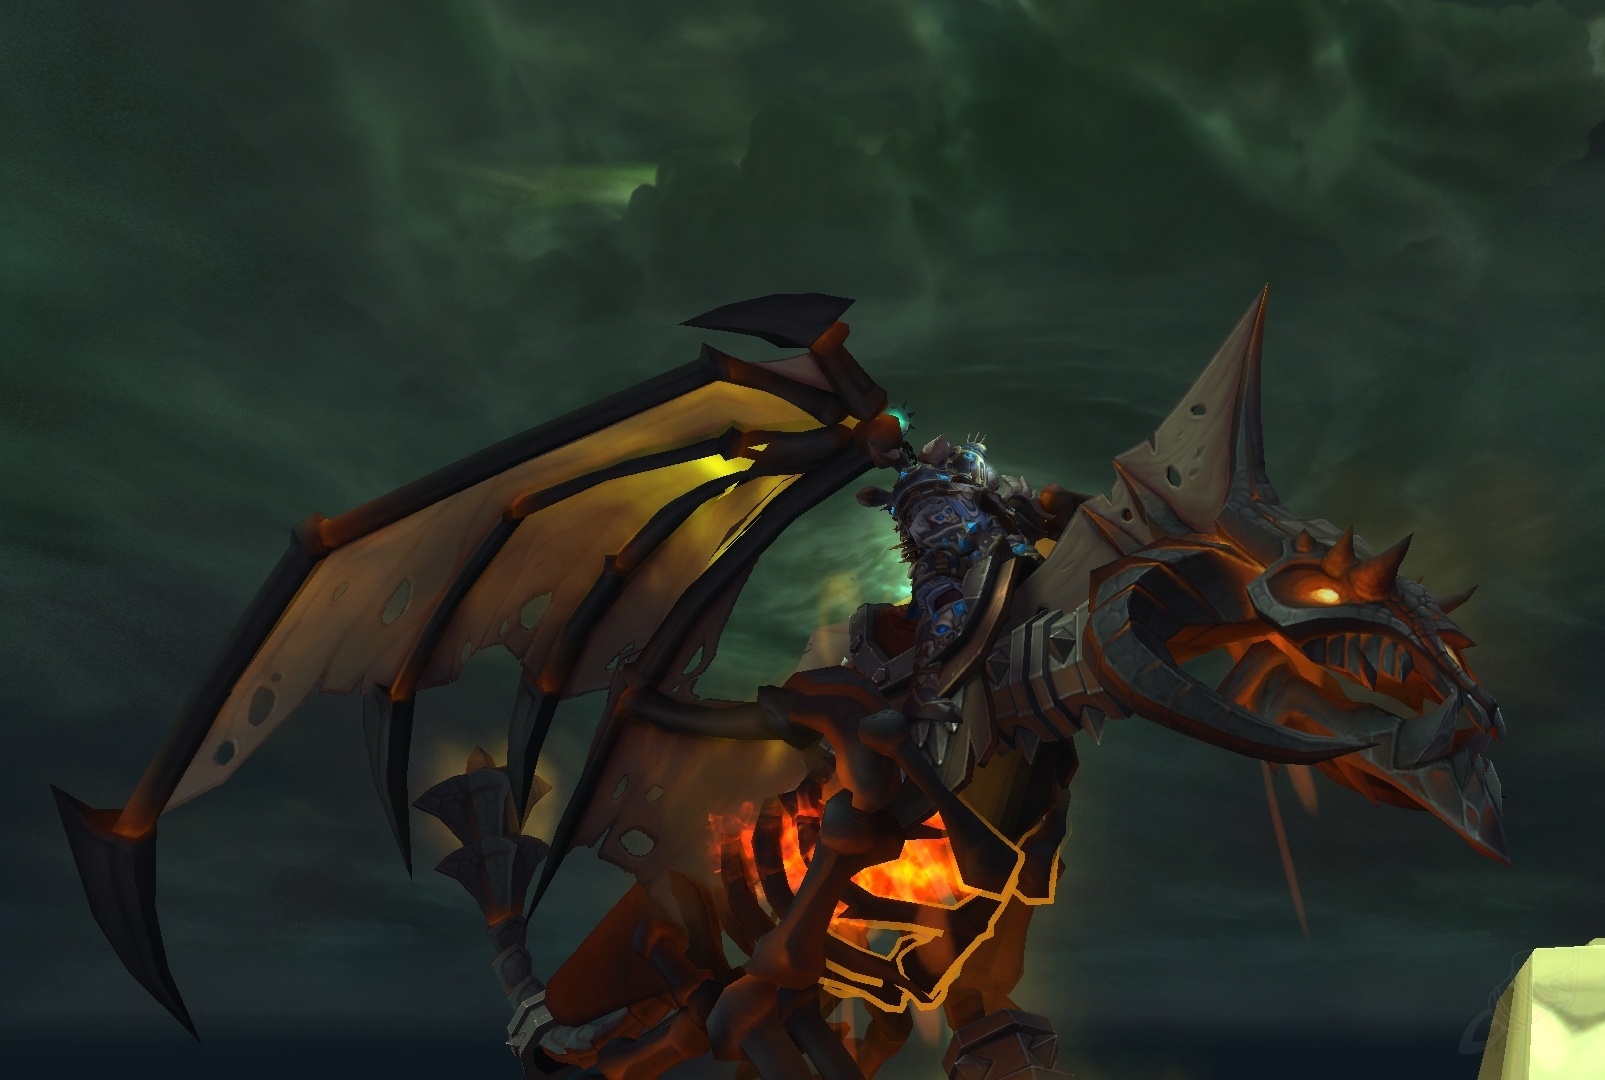 does smoldering ember wyrm only drop on mythic